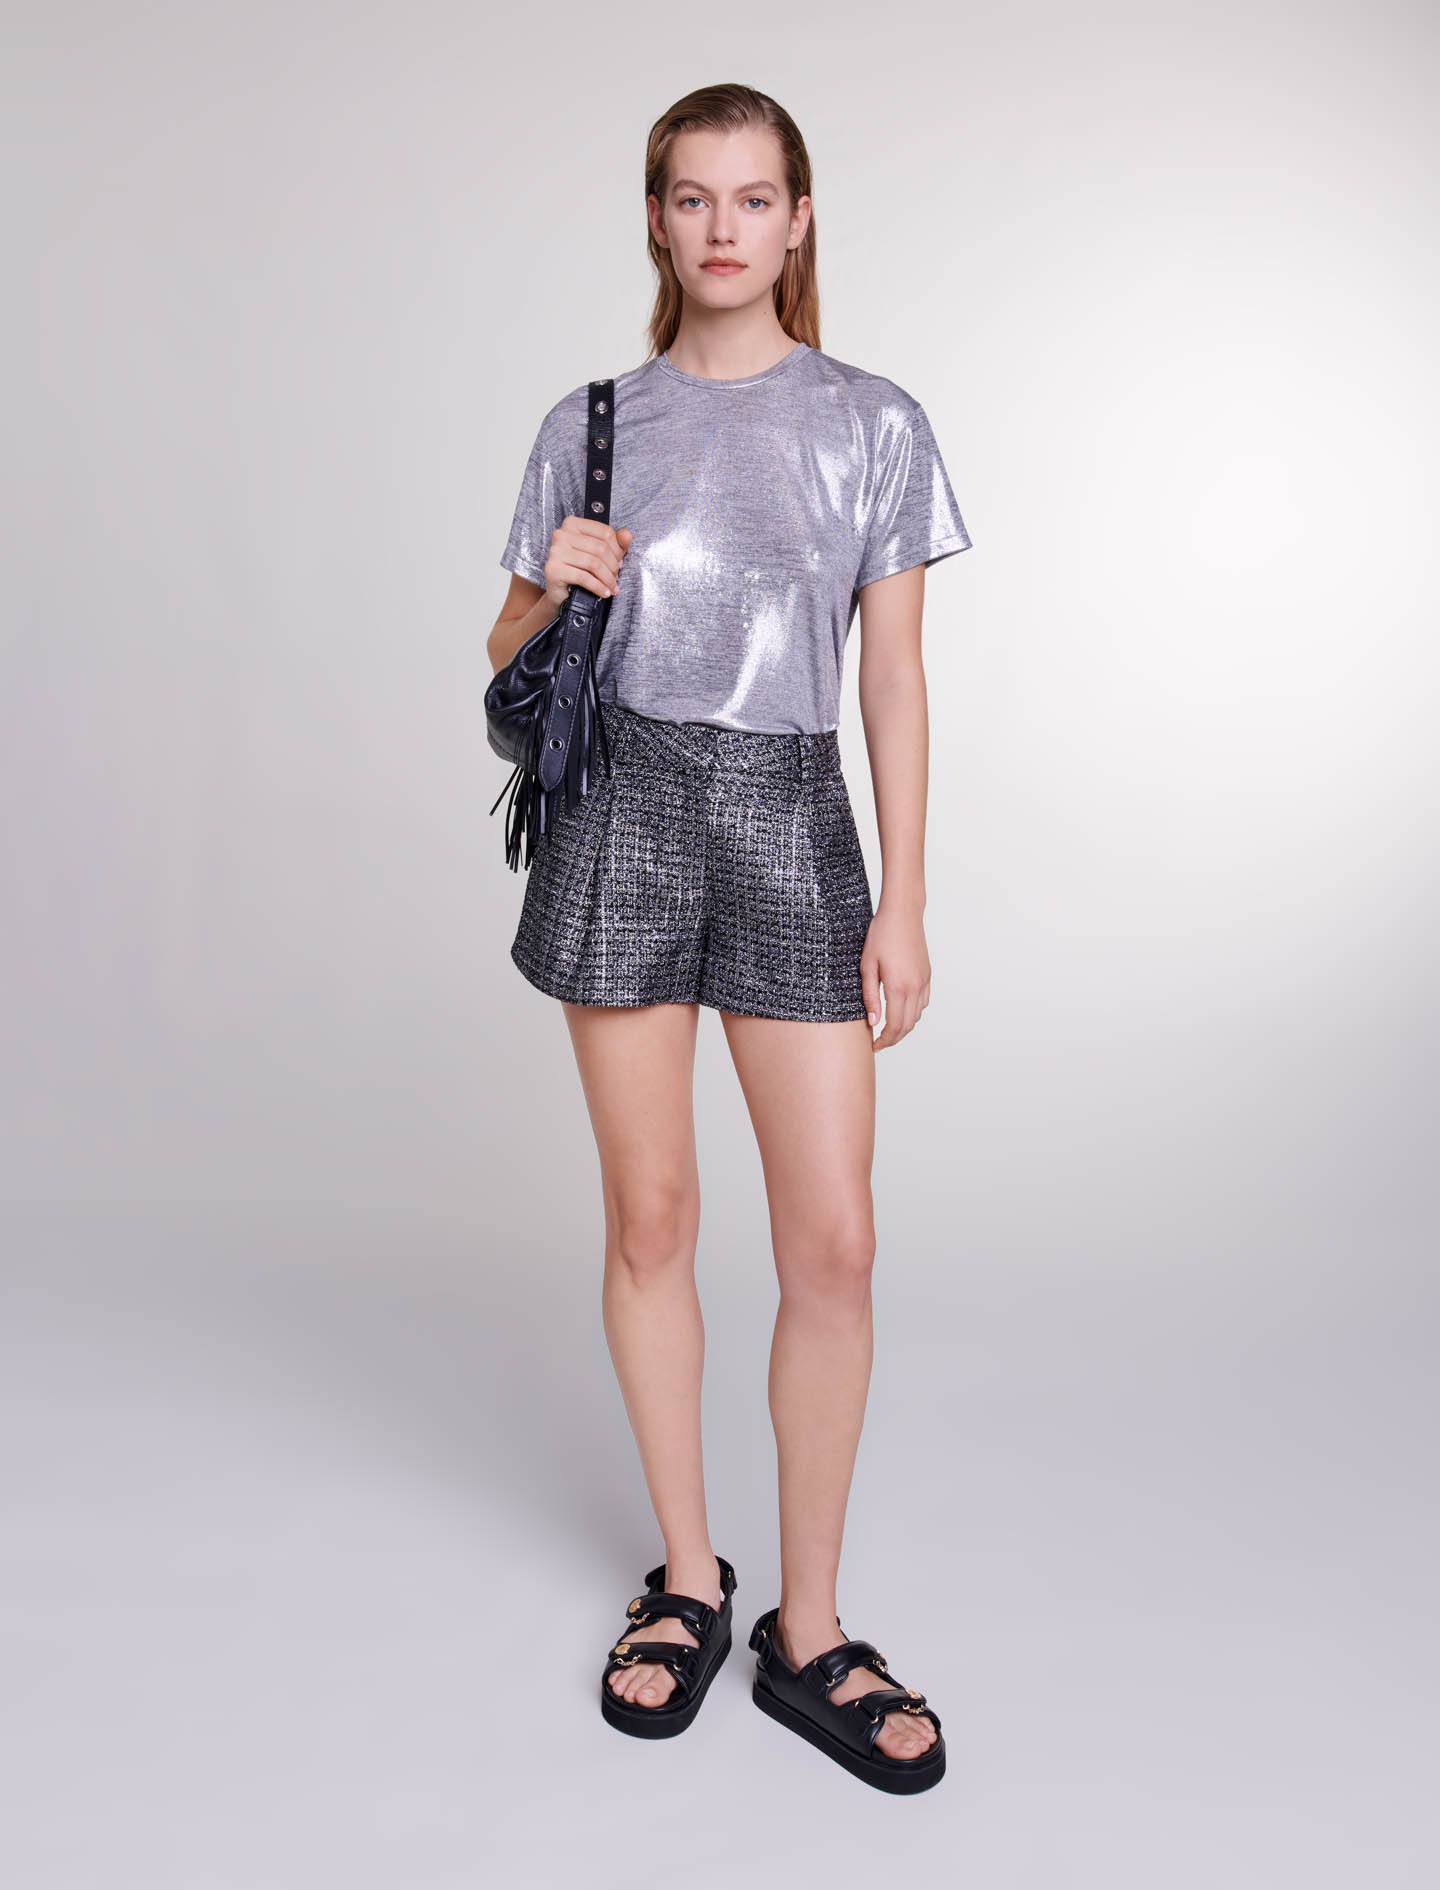 Maje Woman's polyester, Lamé T-shirt for Spring/Summer, in color Silver / Grey